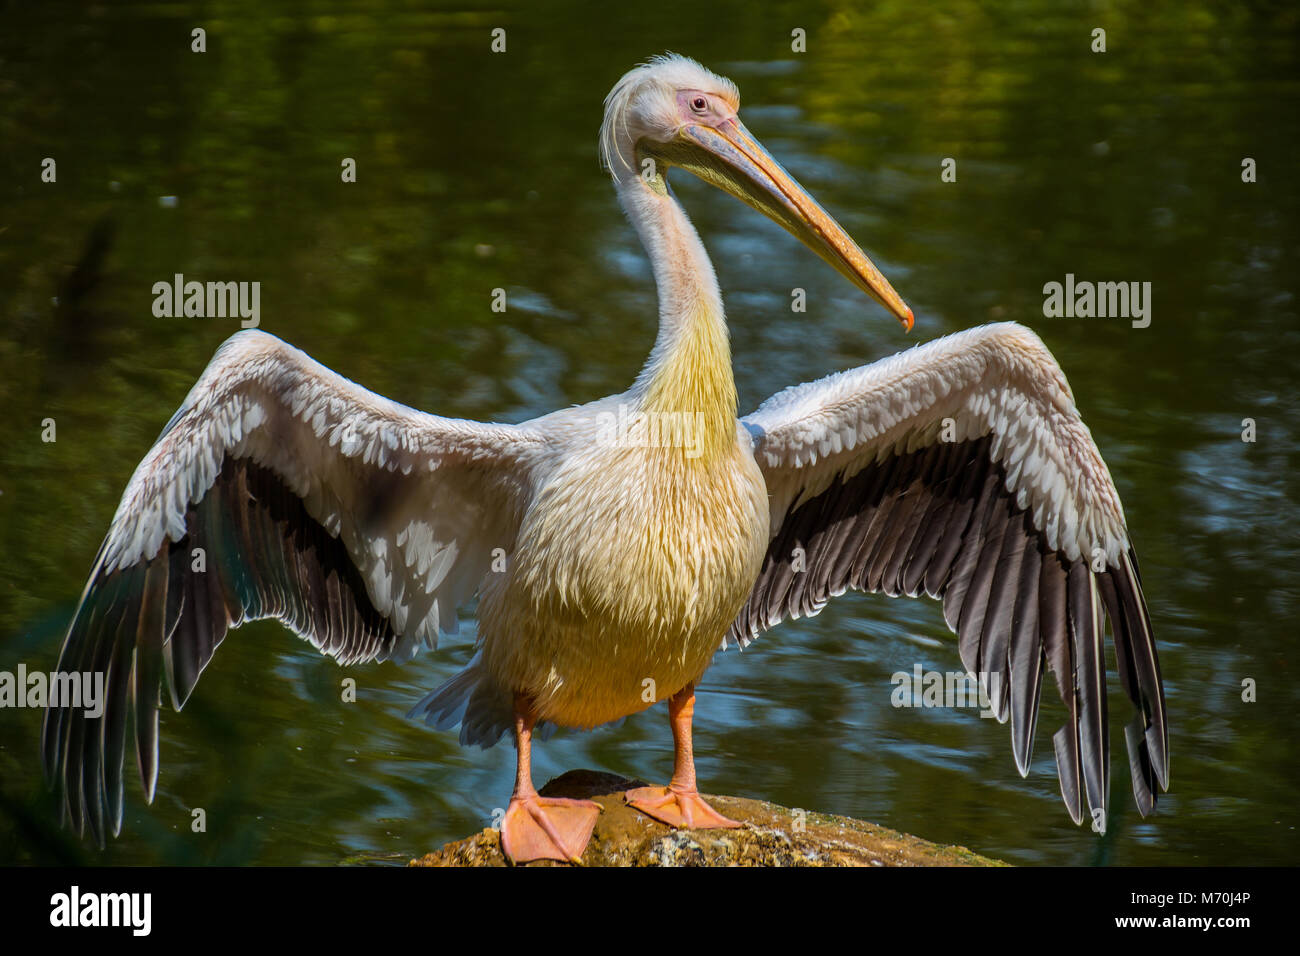 Pelican with opened wings Stock Photo